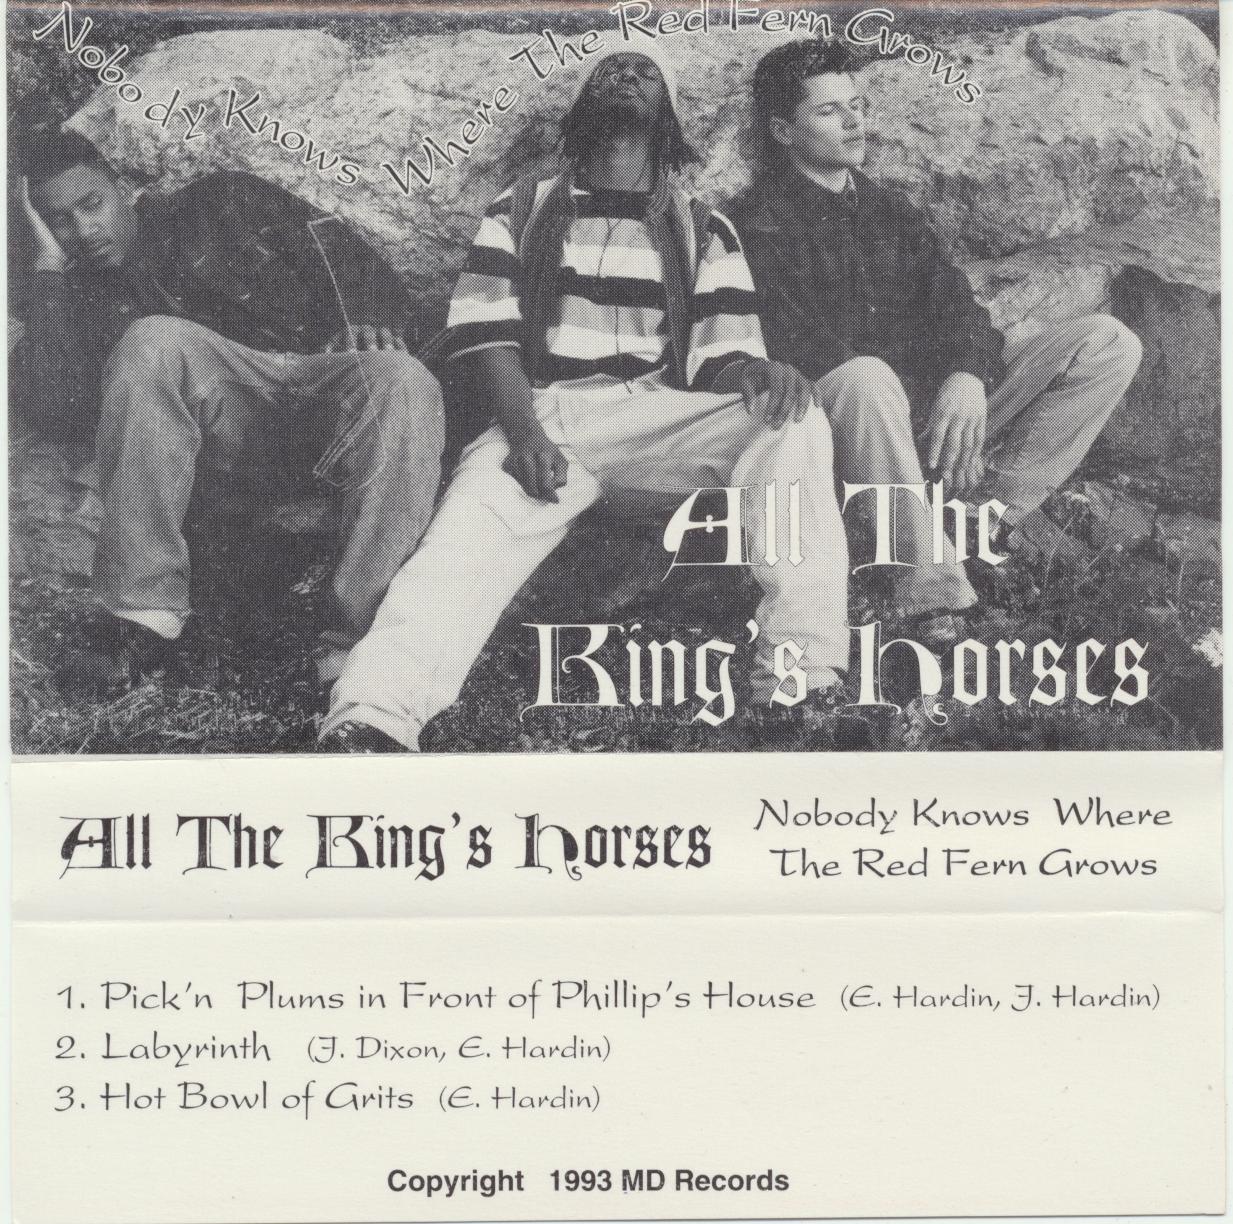 Karmina - all the King's Horses обложка альбома. 1995 - Raoul and the Kings of Spain. Nobody know where